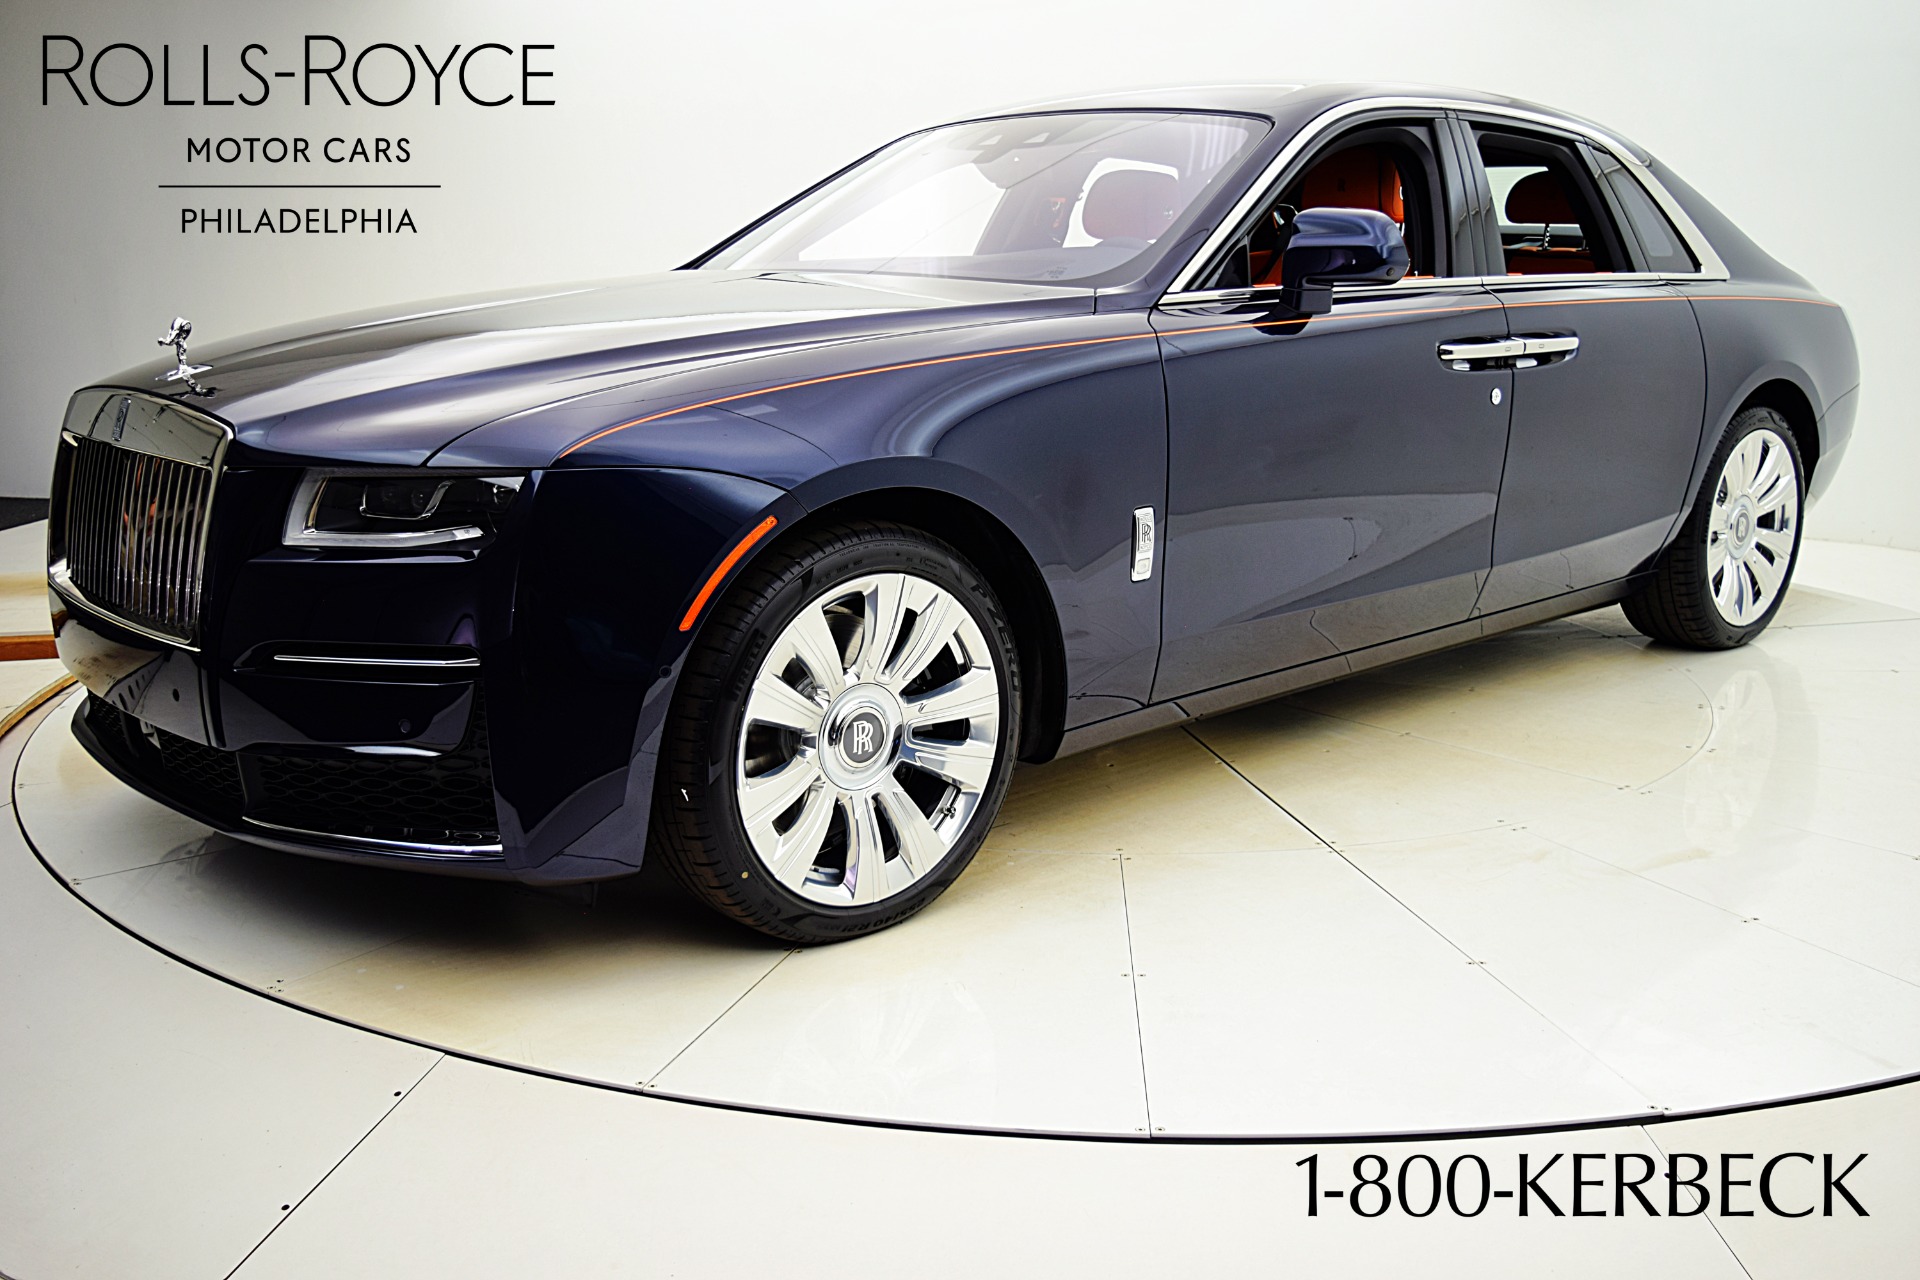 RollsRoyce Bespokes Phantom Limelight Is for the Super Rich and Famous   Carscoops